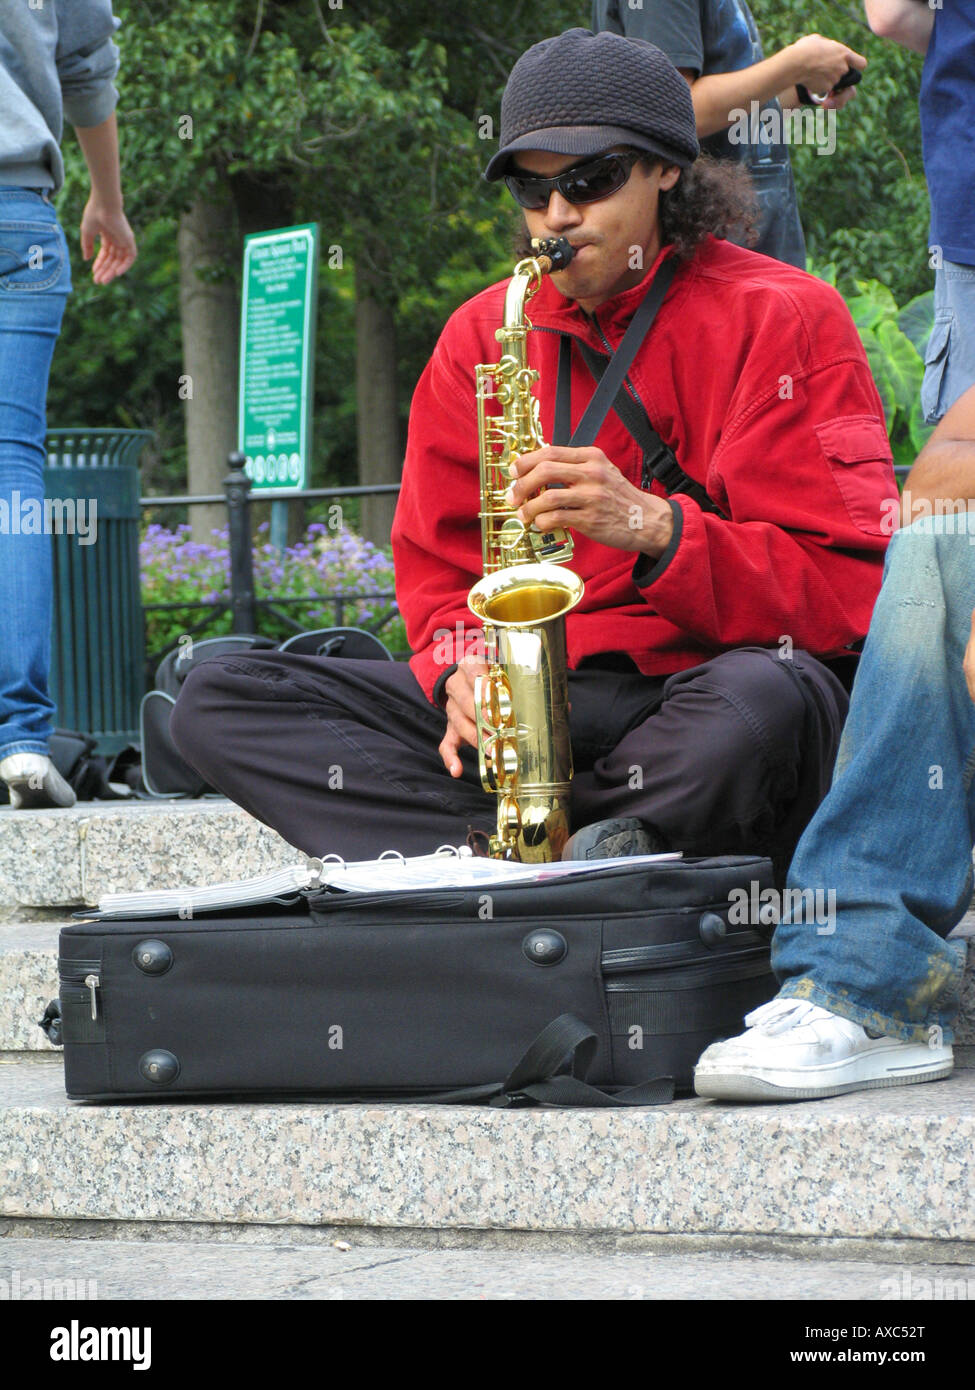 Saxophon player with sunglasses and hat at Union Square, USA, Manhattan, New York Stock Photo